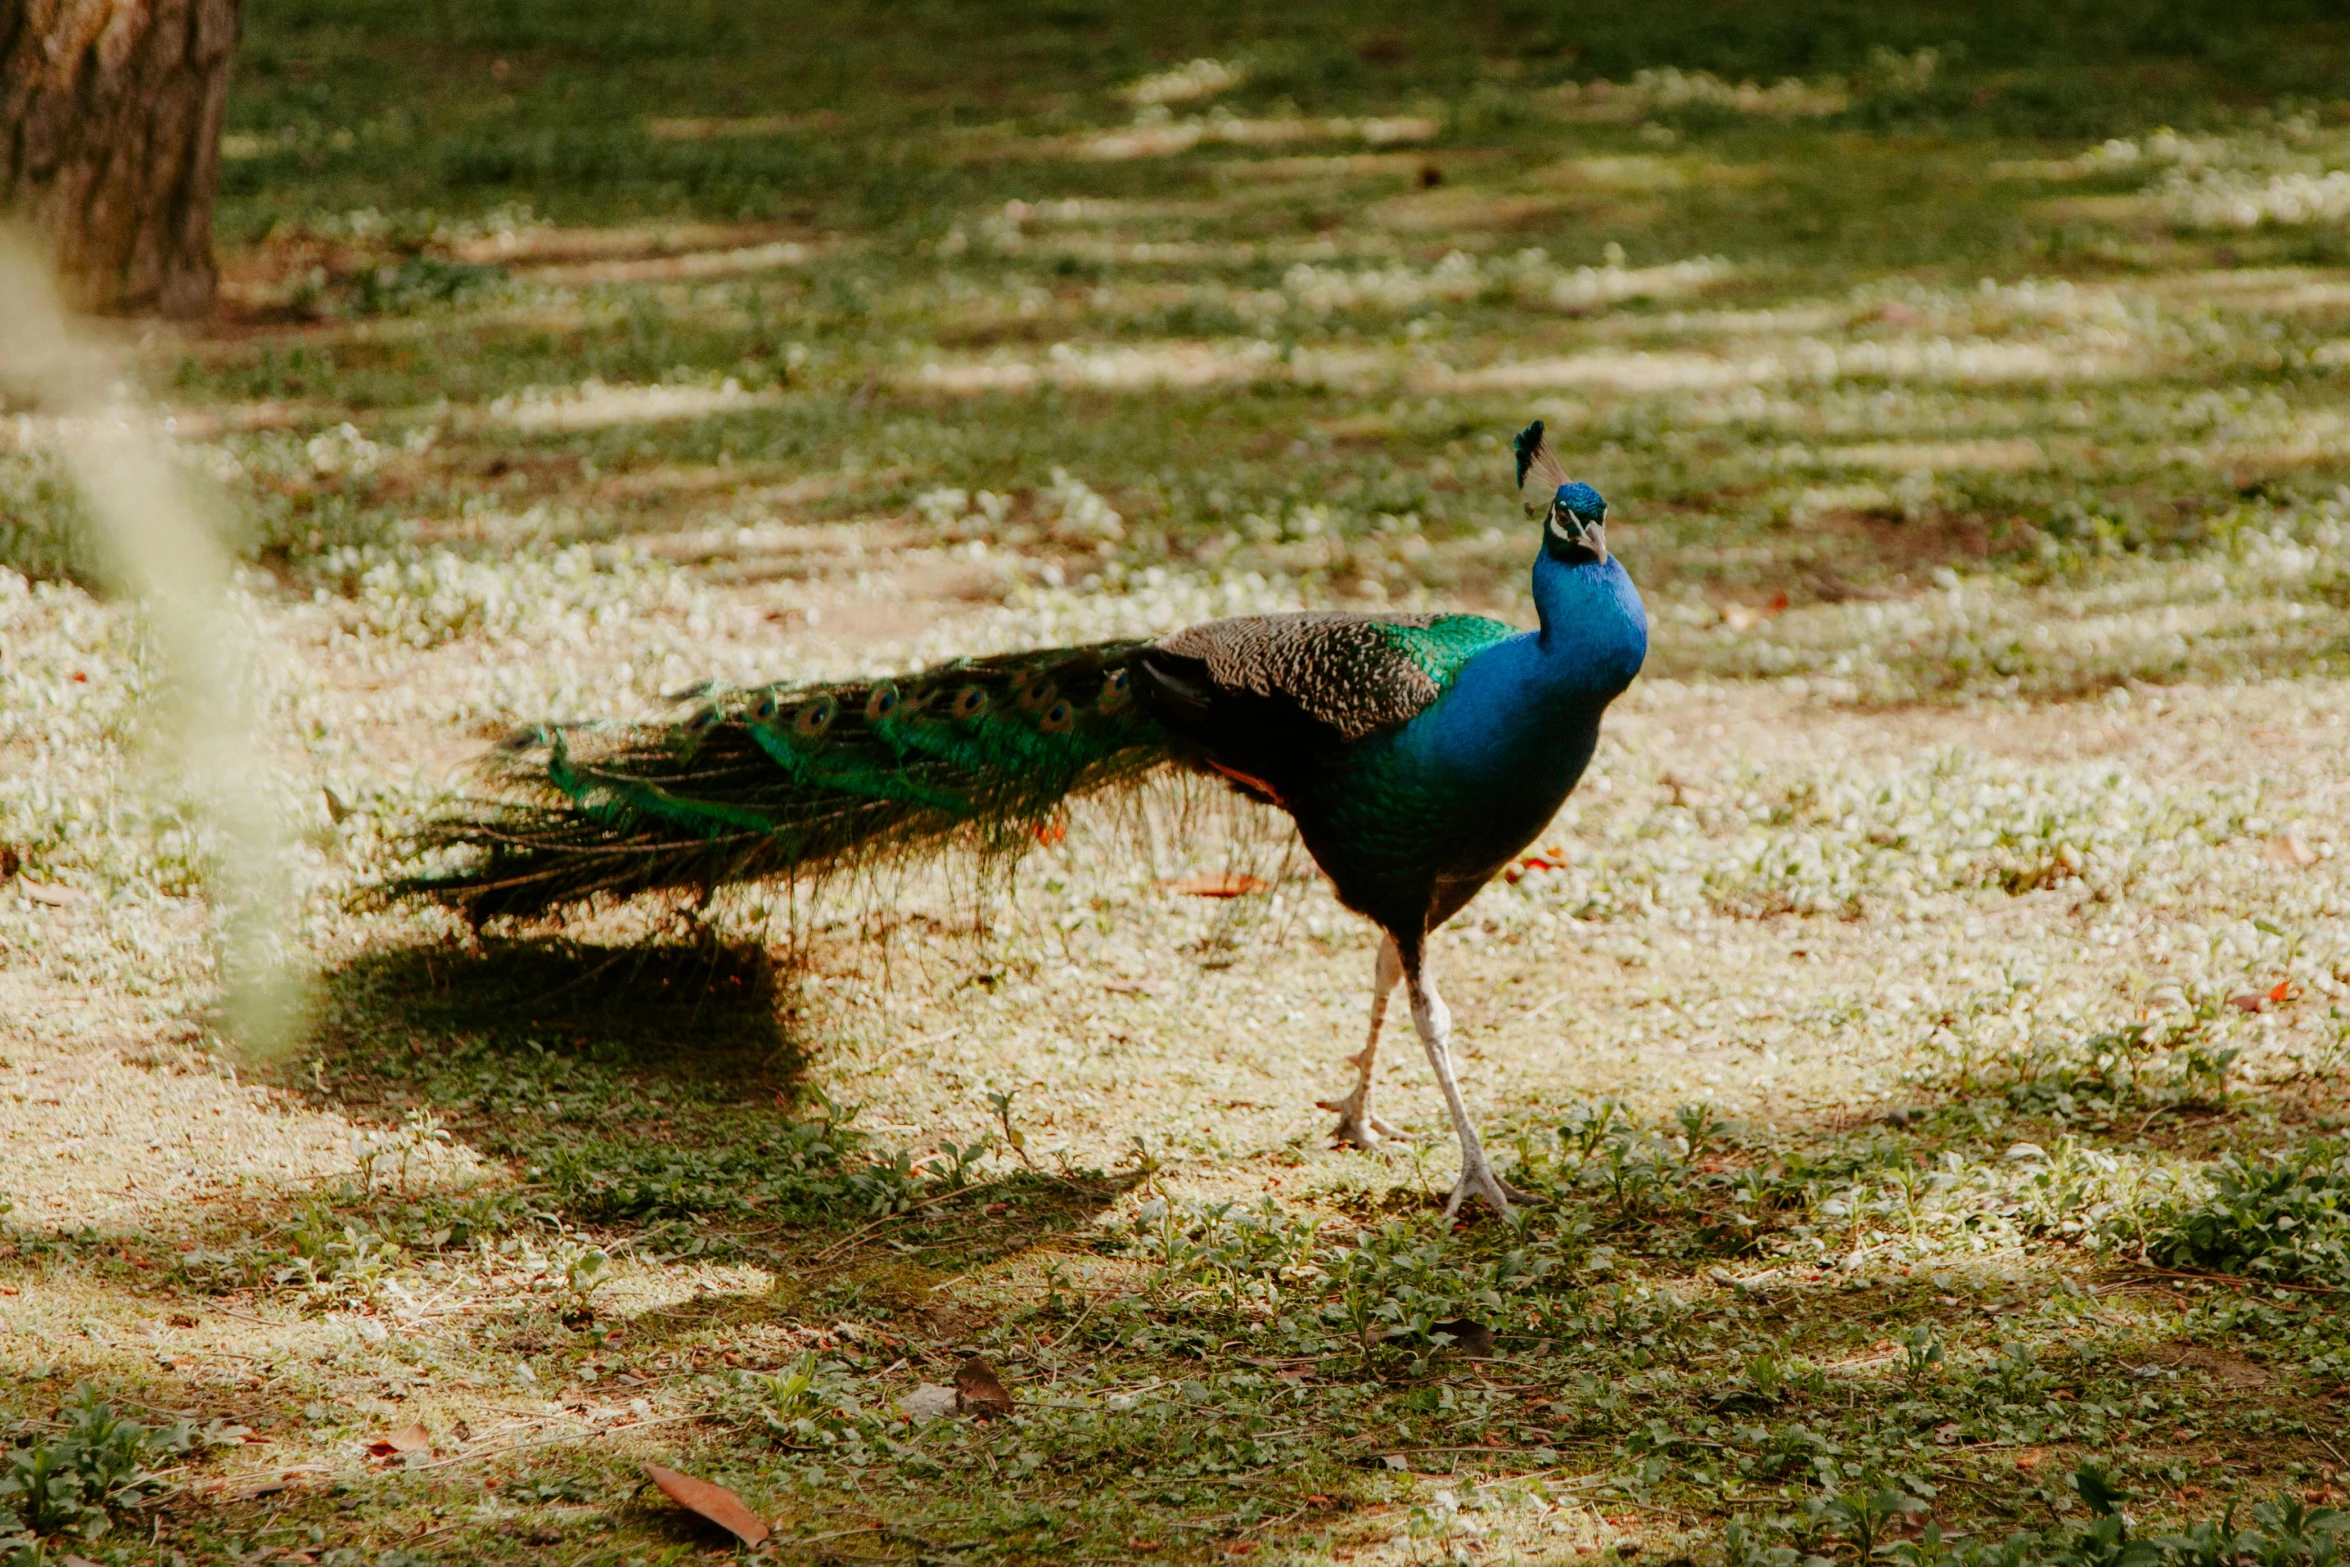 a peacock standing on top of a grass covered field, shady, 2019 trending photo, fan favorite, india